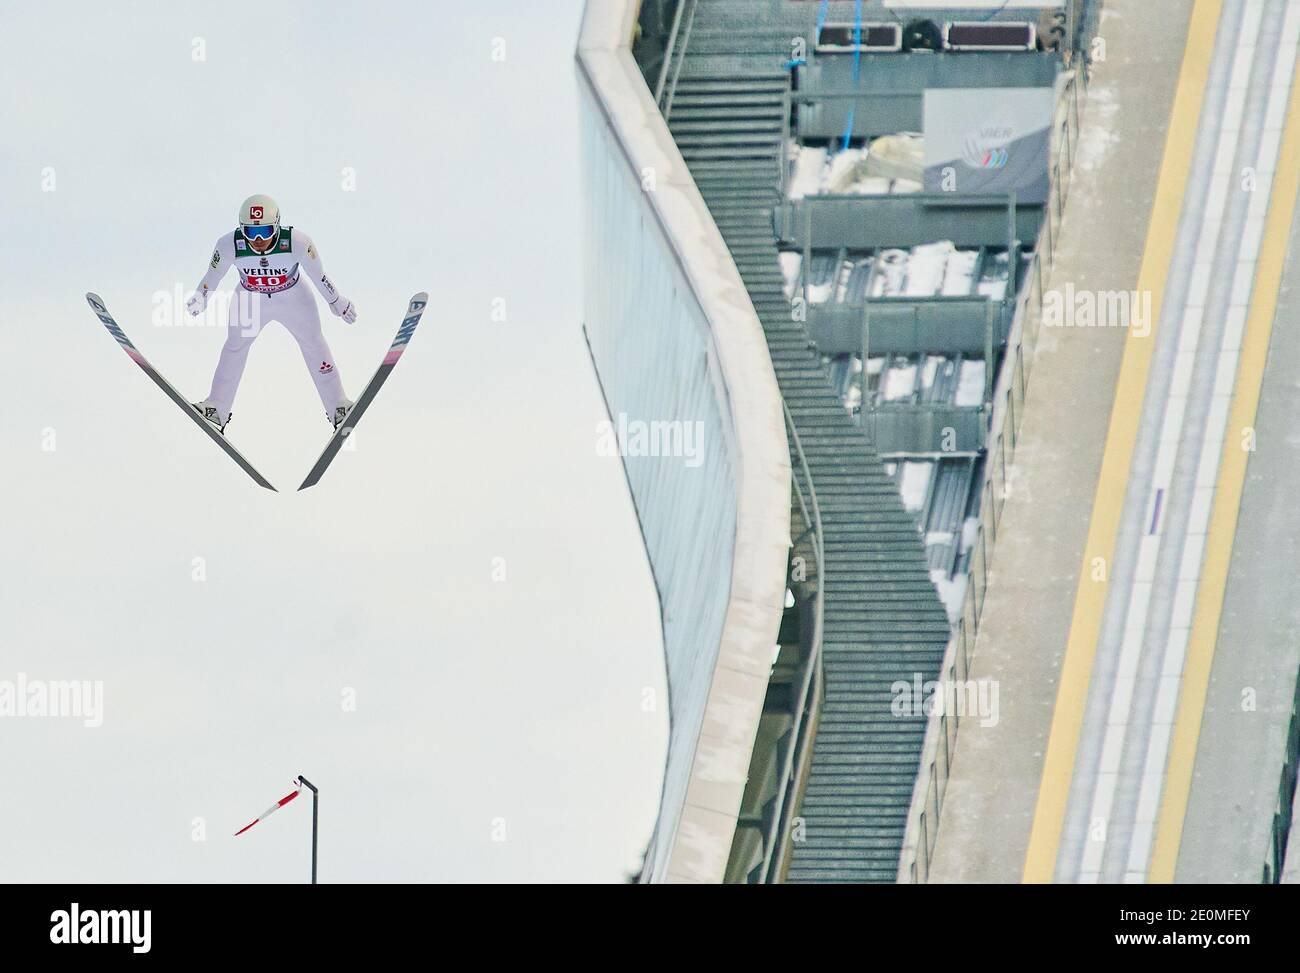 Johann Andre FORFANG, NOR  in action at the Four Hills Tournament Ski Jumping at Olympic Stadium, Grosse Olympiaschanze in Garmisch-Partenkirchen, Bavaria, Germany, January 01, 2021.  © Peter Schatz / Alamy Live News Stock Photo